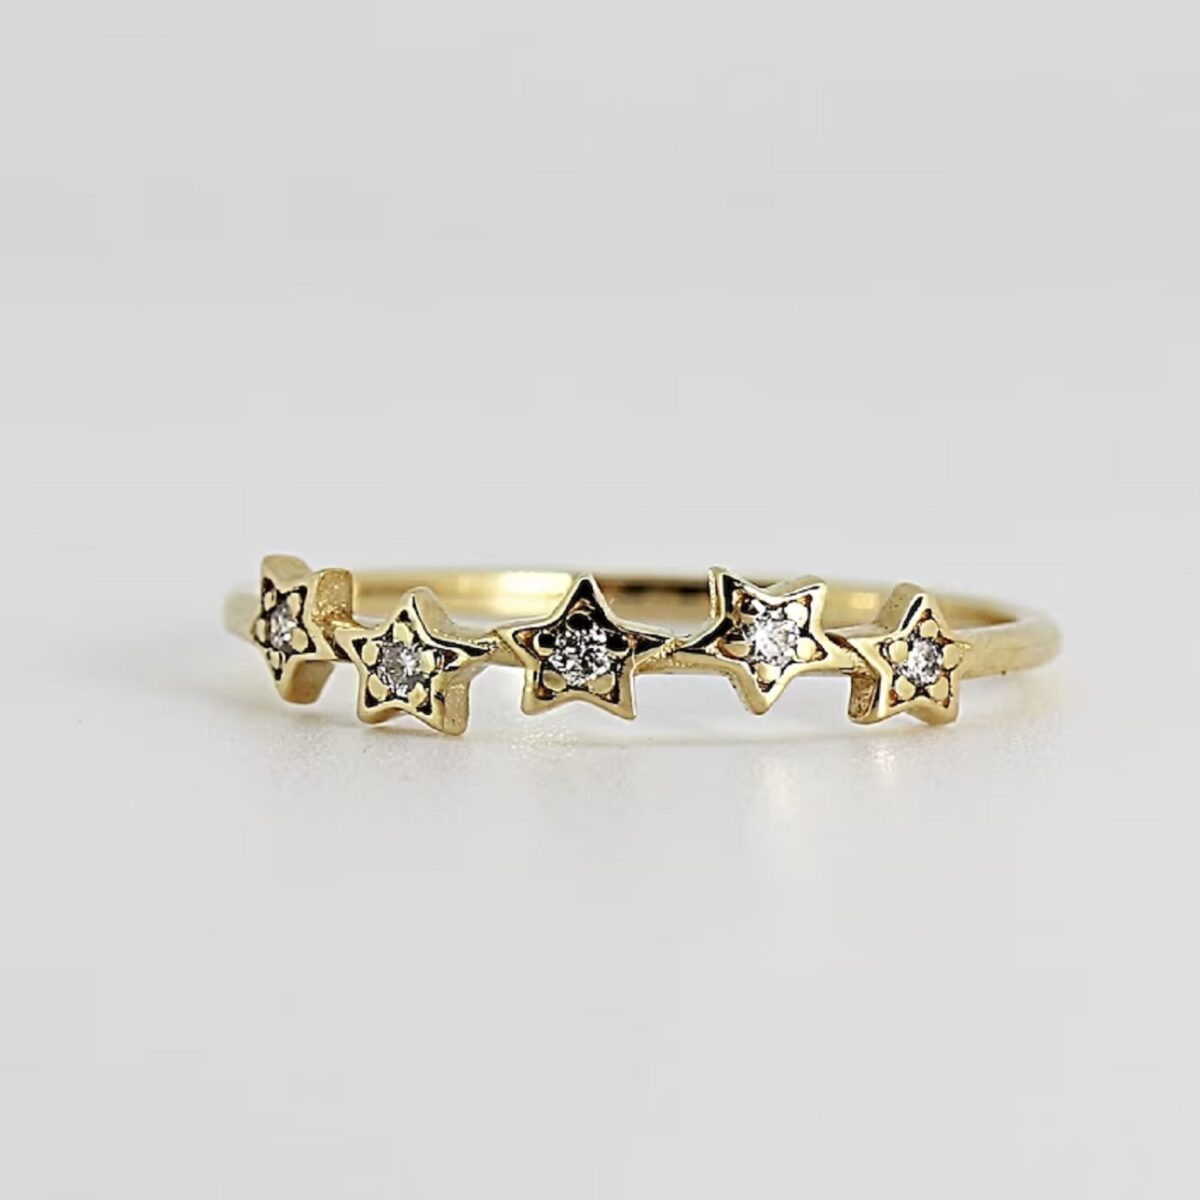 Round cut lab grown diamond star stack ring crafted in 14k yellow gold.